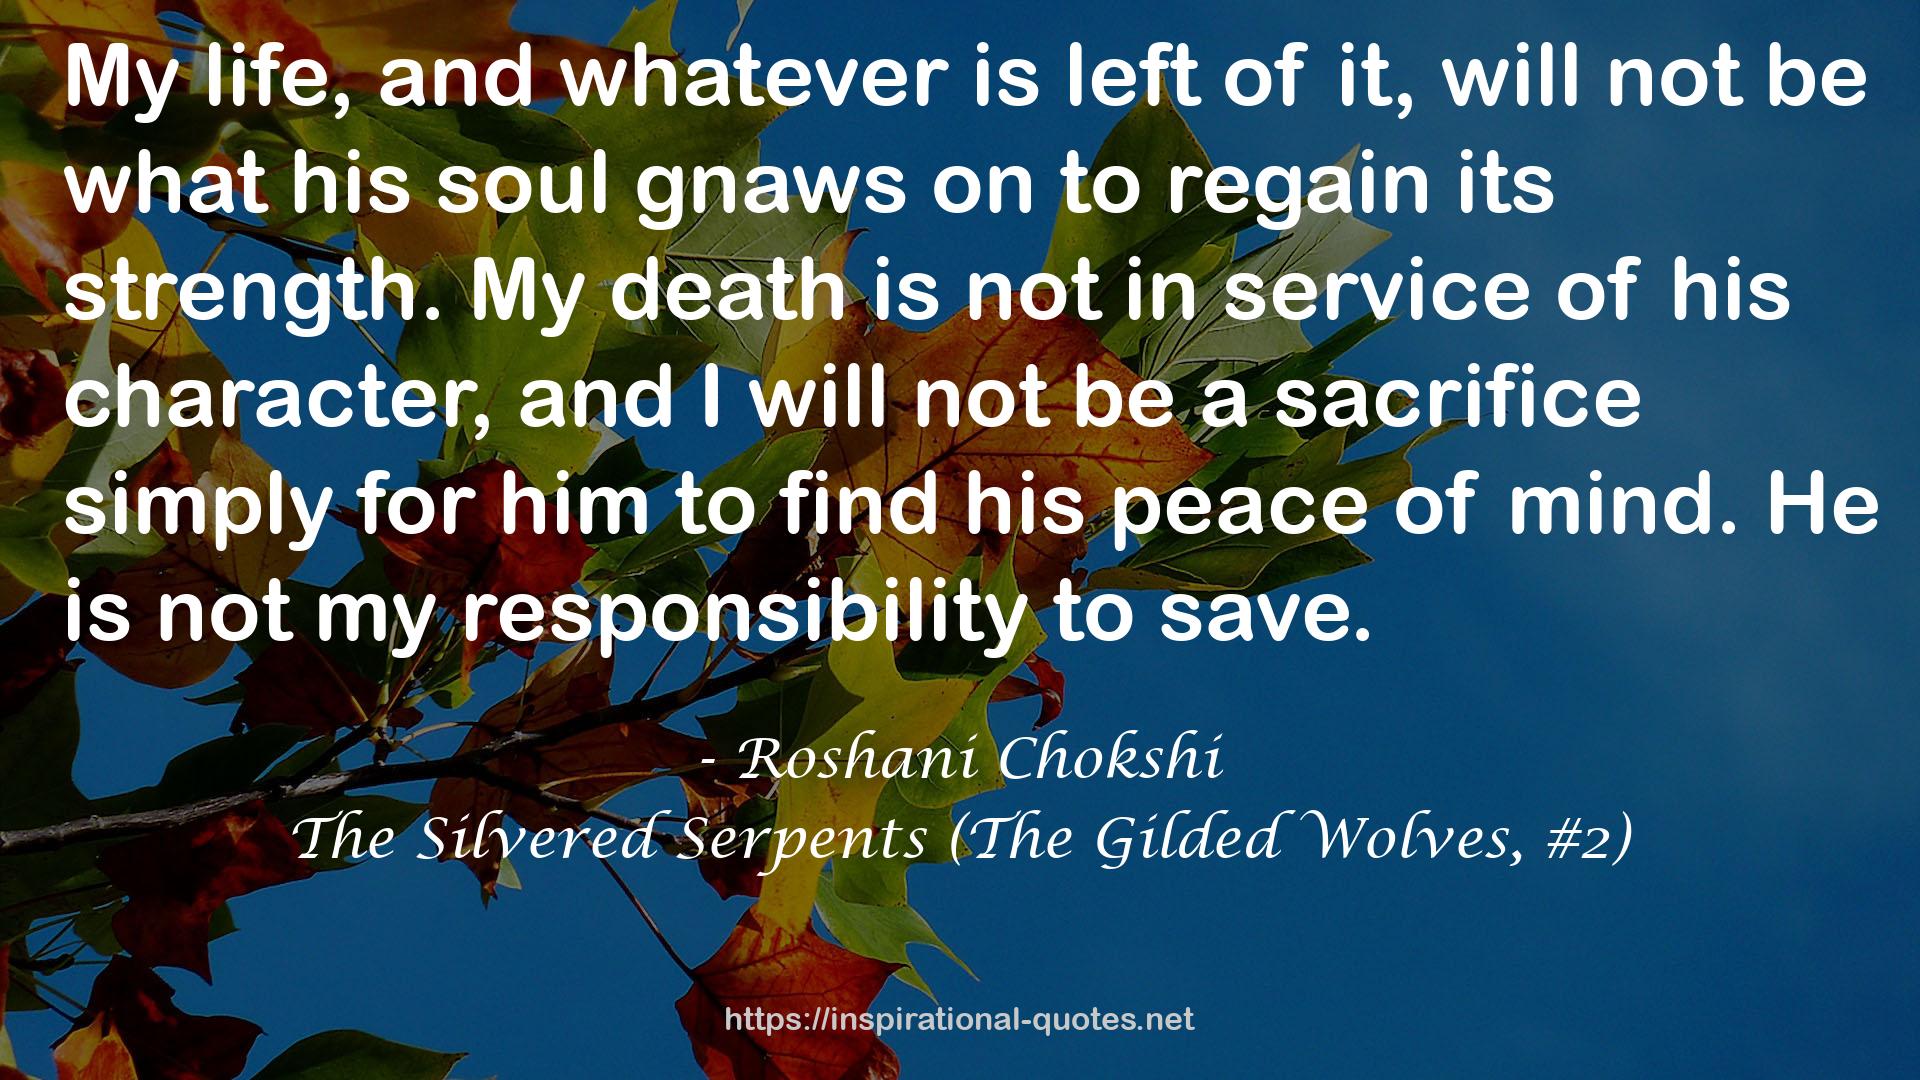 The Silvered Serpents (The Gilded Wolves, #2) QUOTES